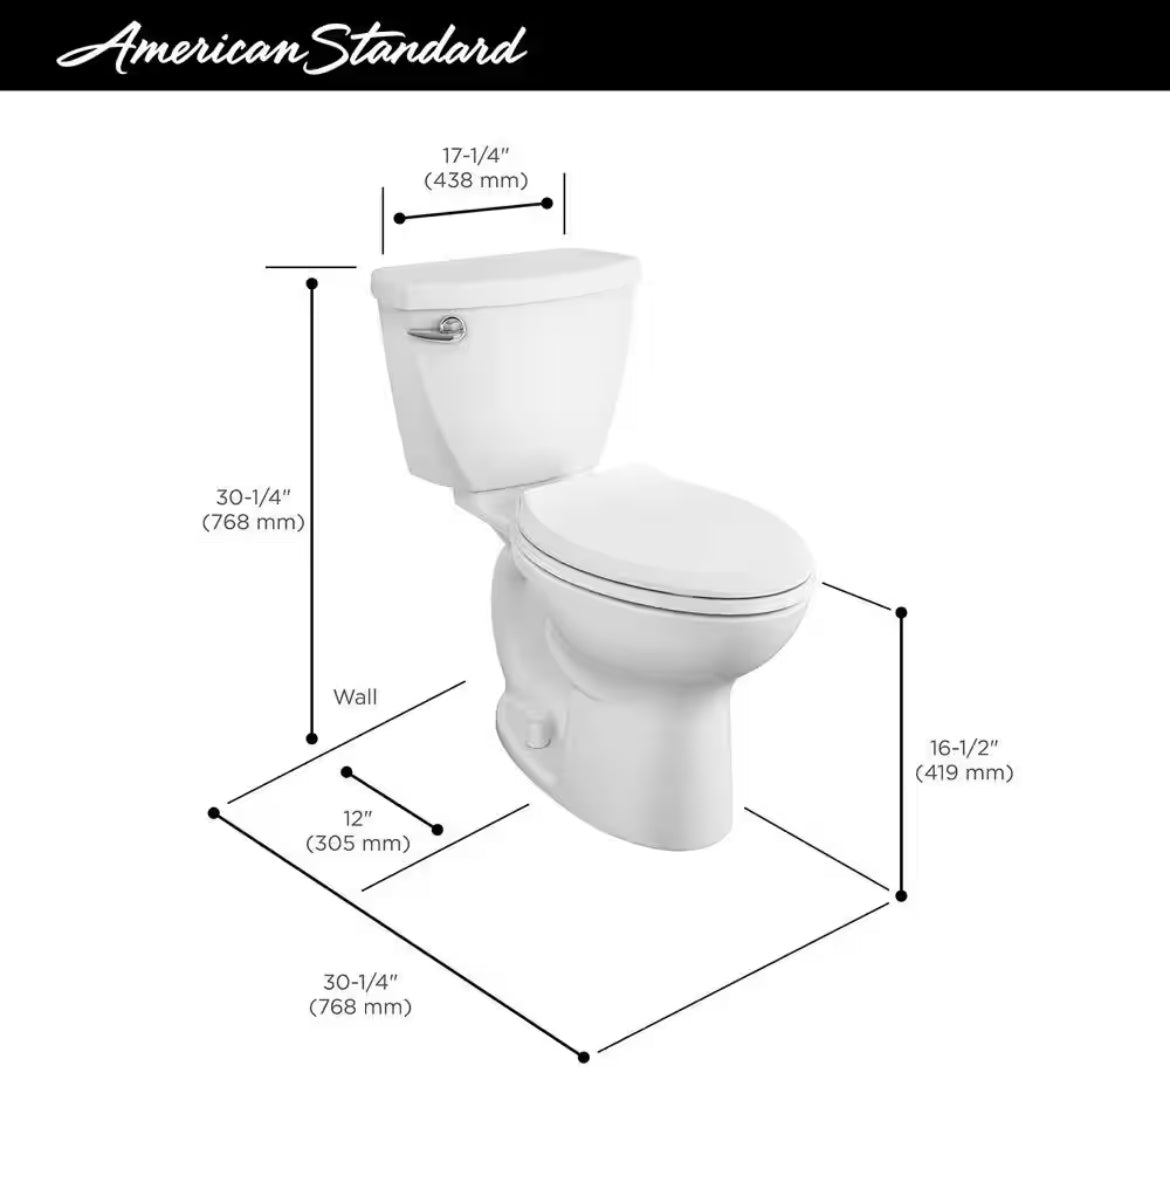 Cadet 3 FloWise Two-Piece 1.28 GPF Single Flush Elongated Chair Height Toilet with Slow-Close Seat in White